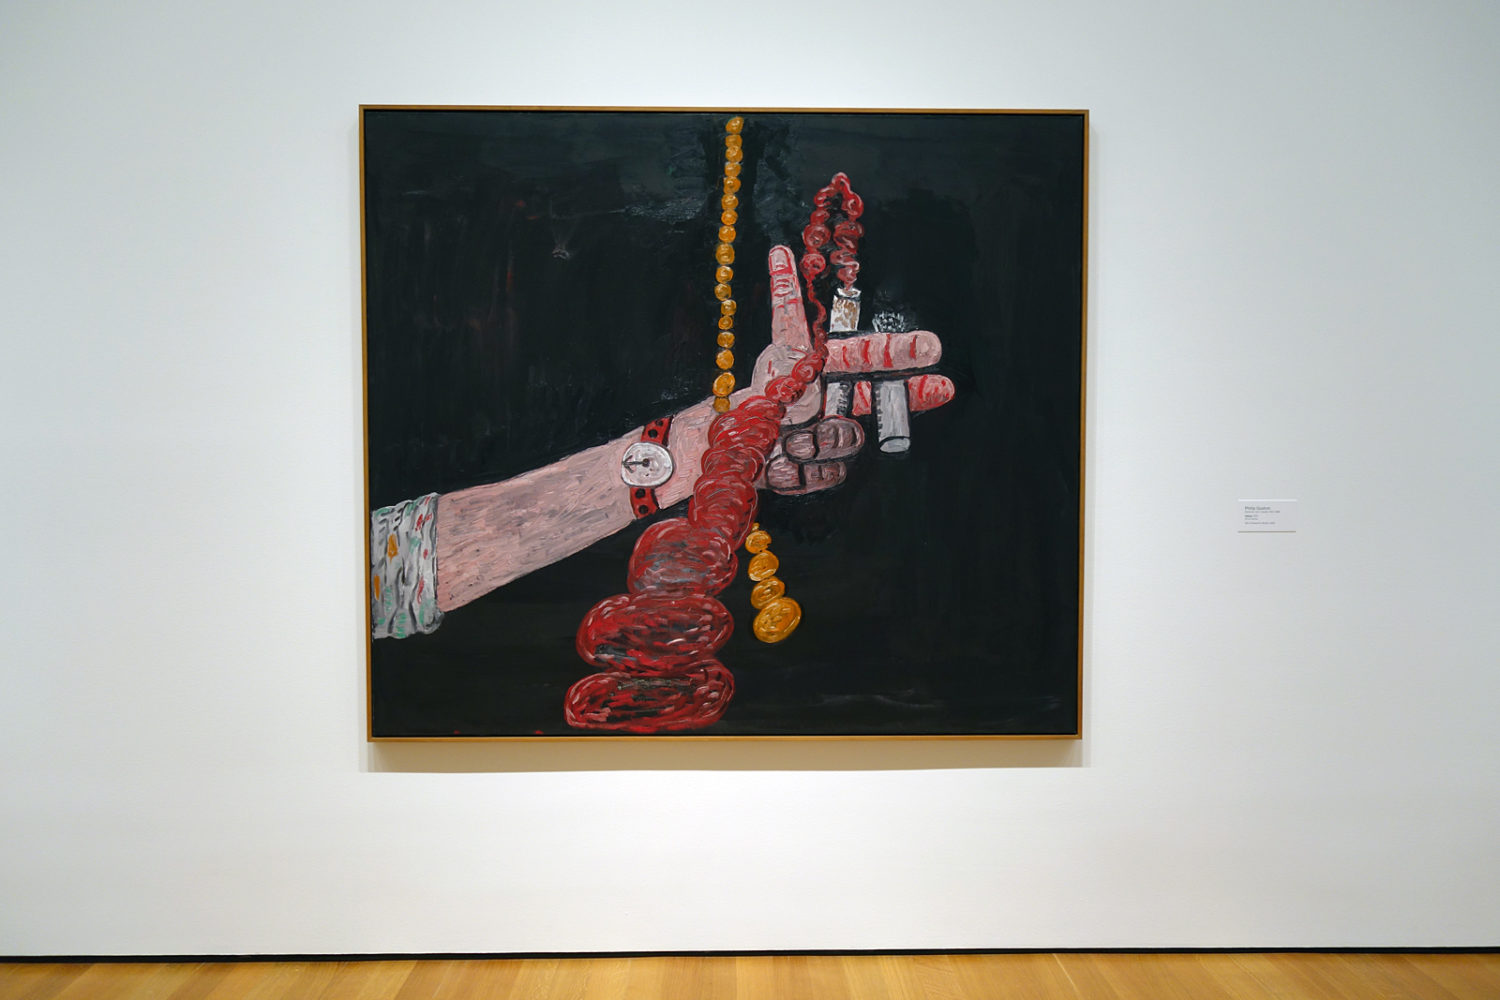 Philip Guston "Talking" at MoMA in 2017